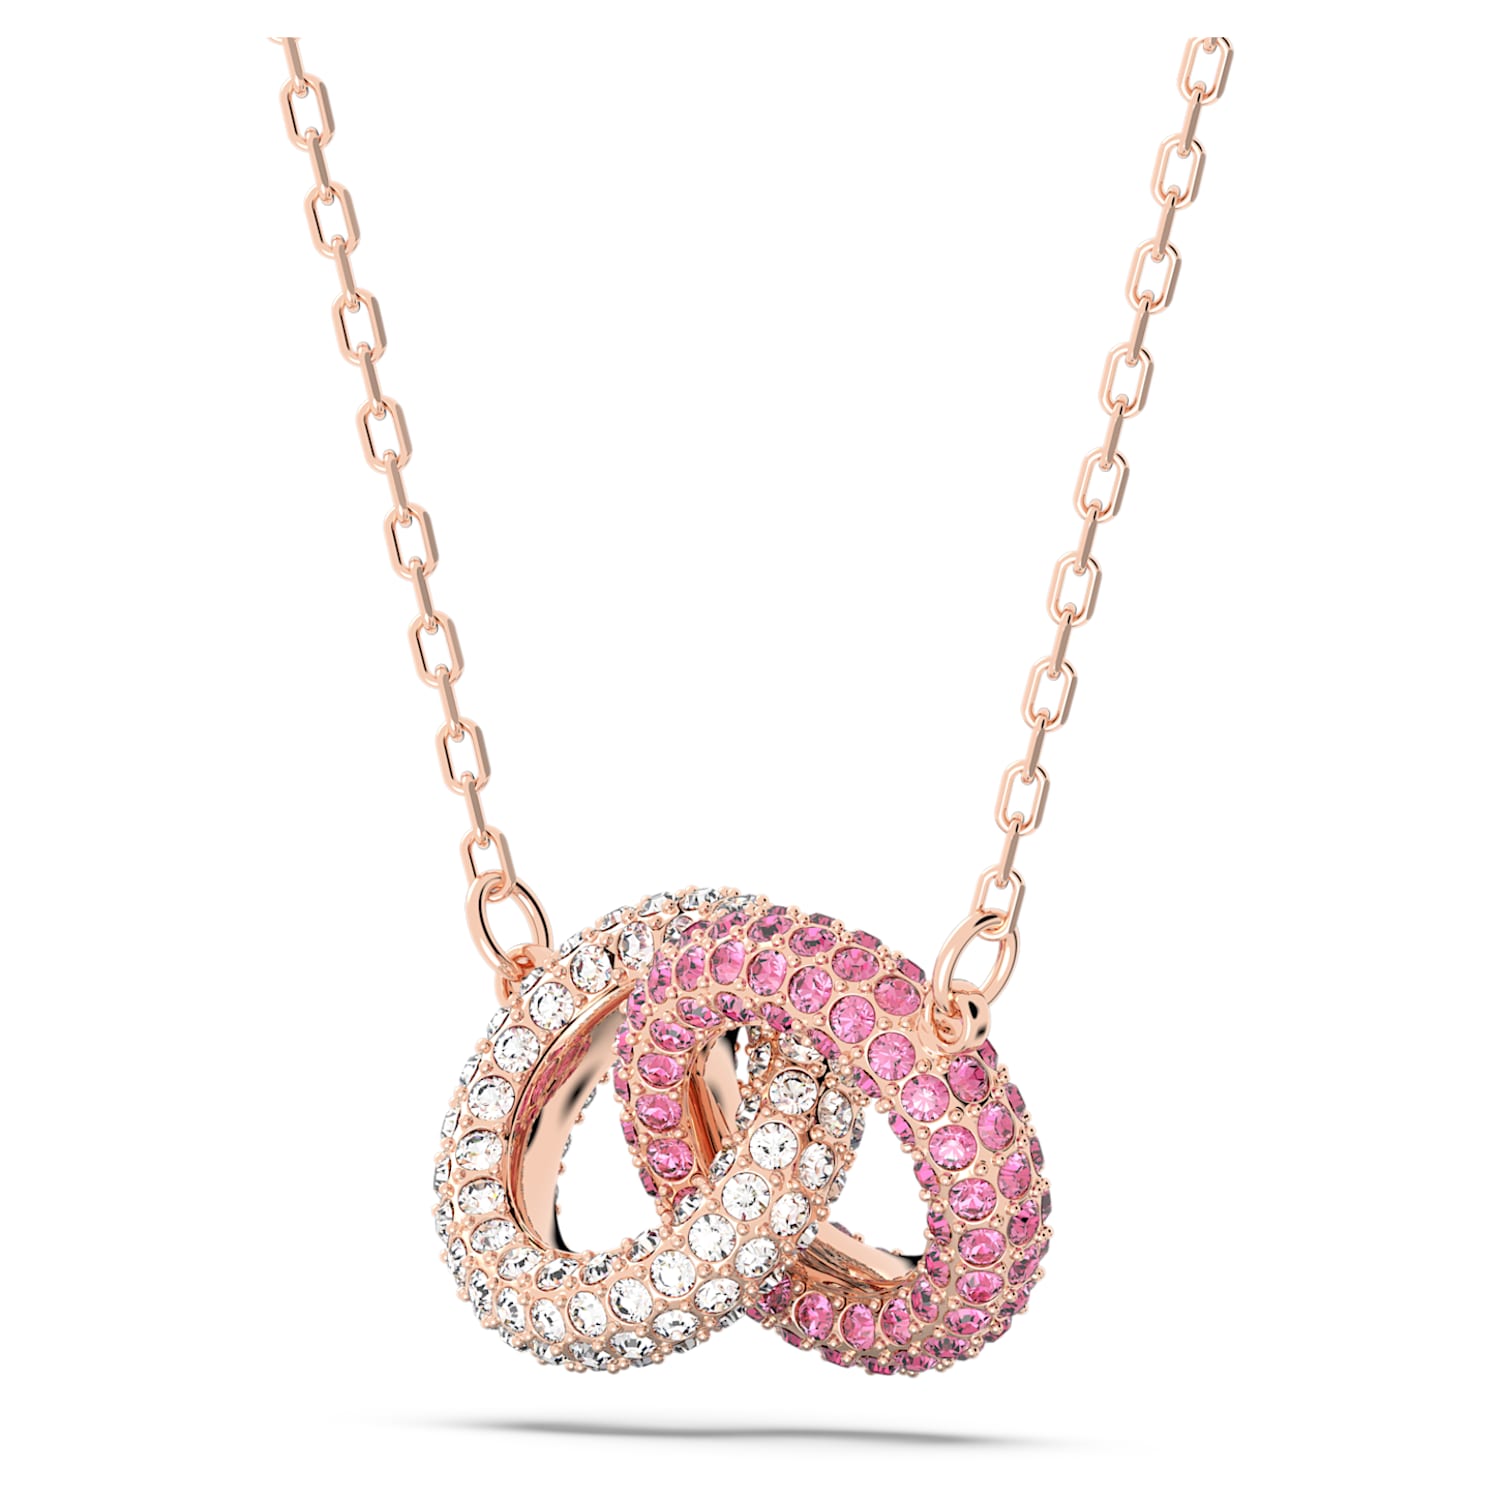 Stone necklace, Pavé, Intertwined circles, Pink, Rose gold-tone 